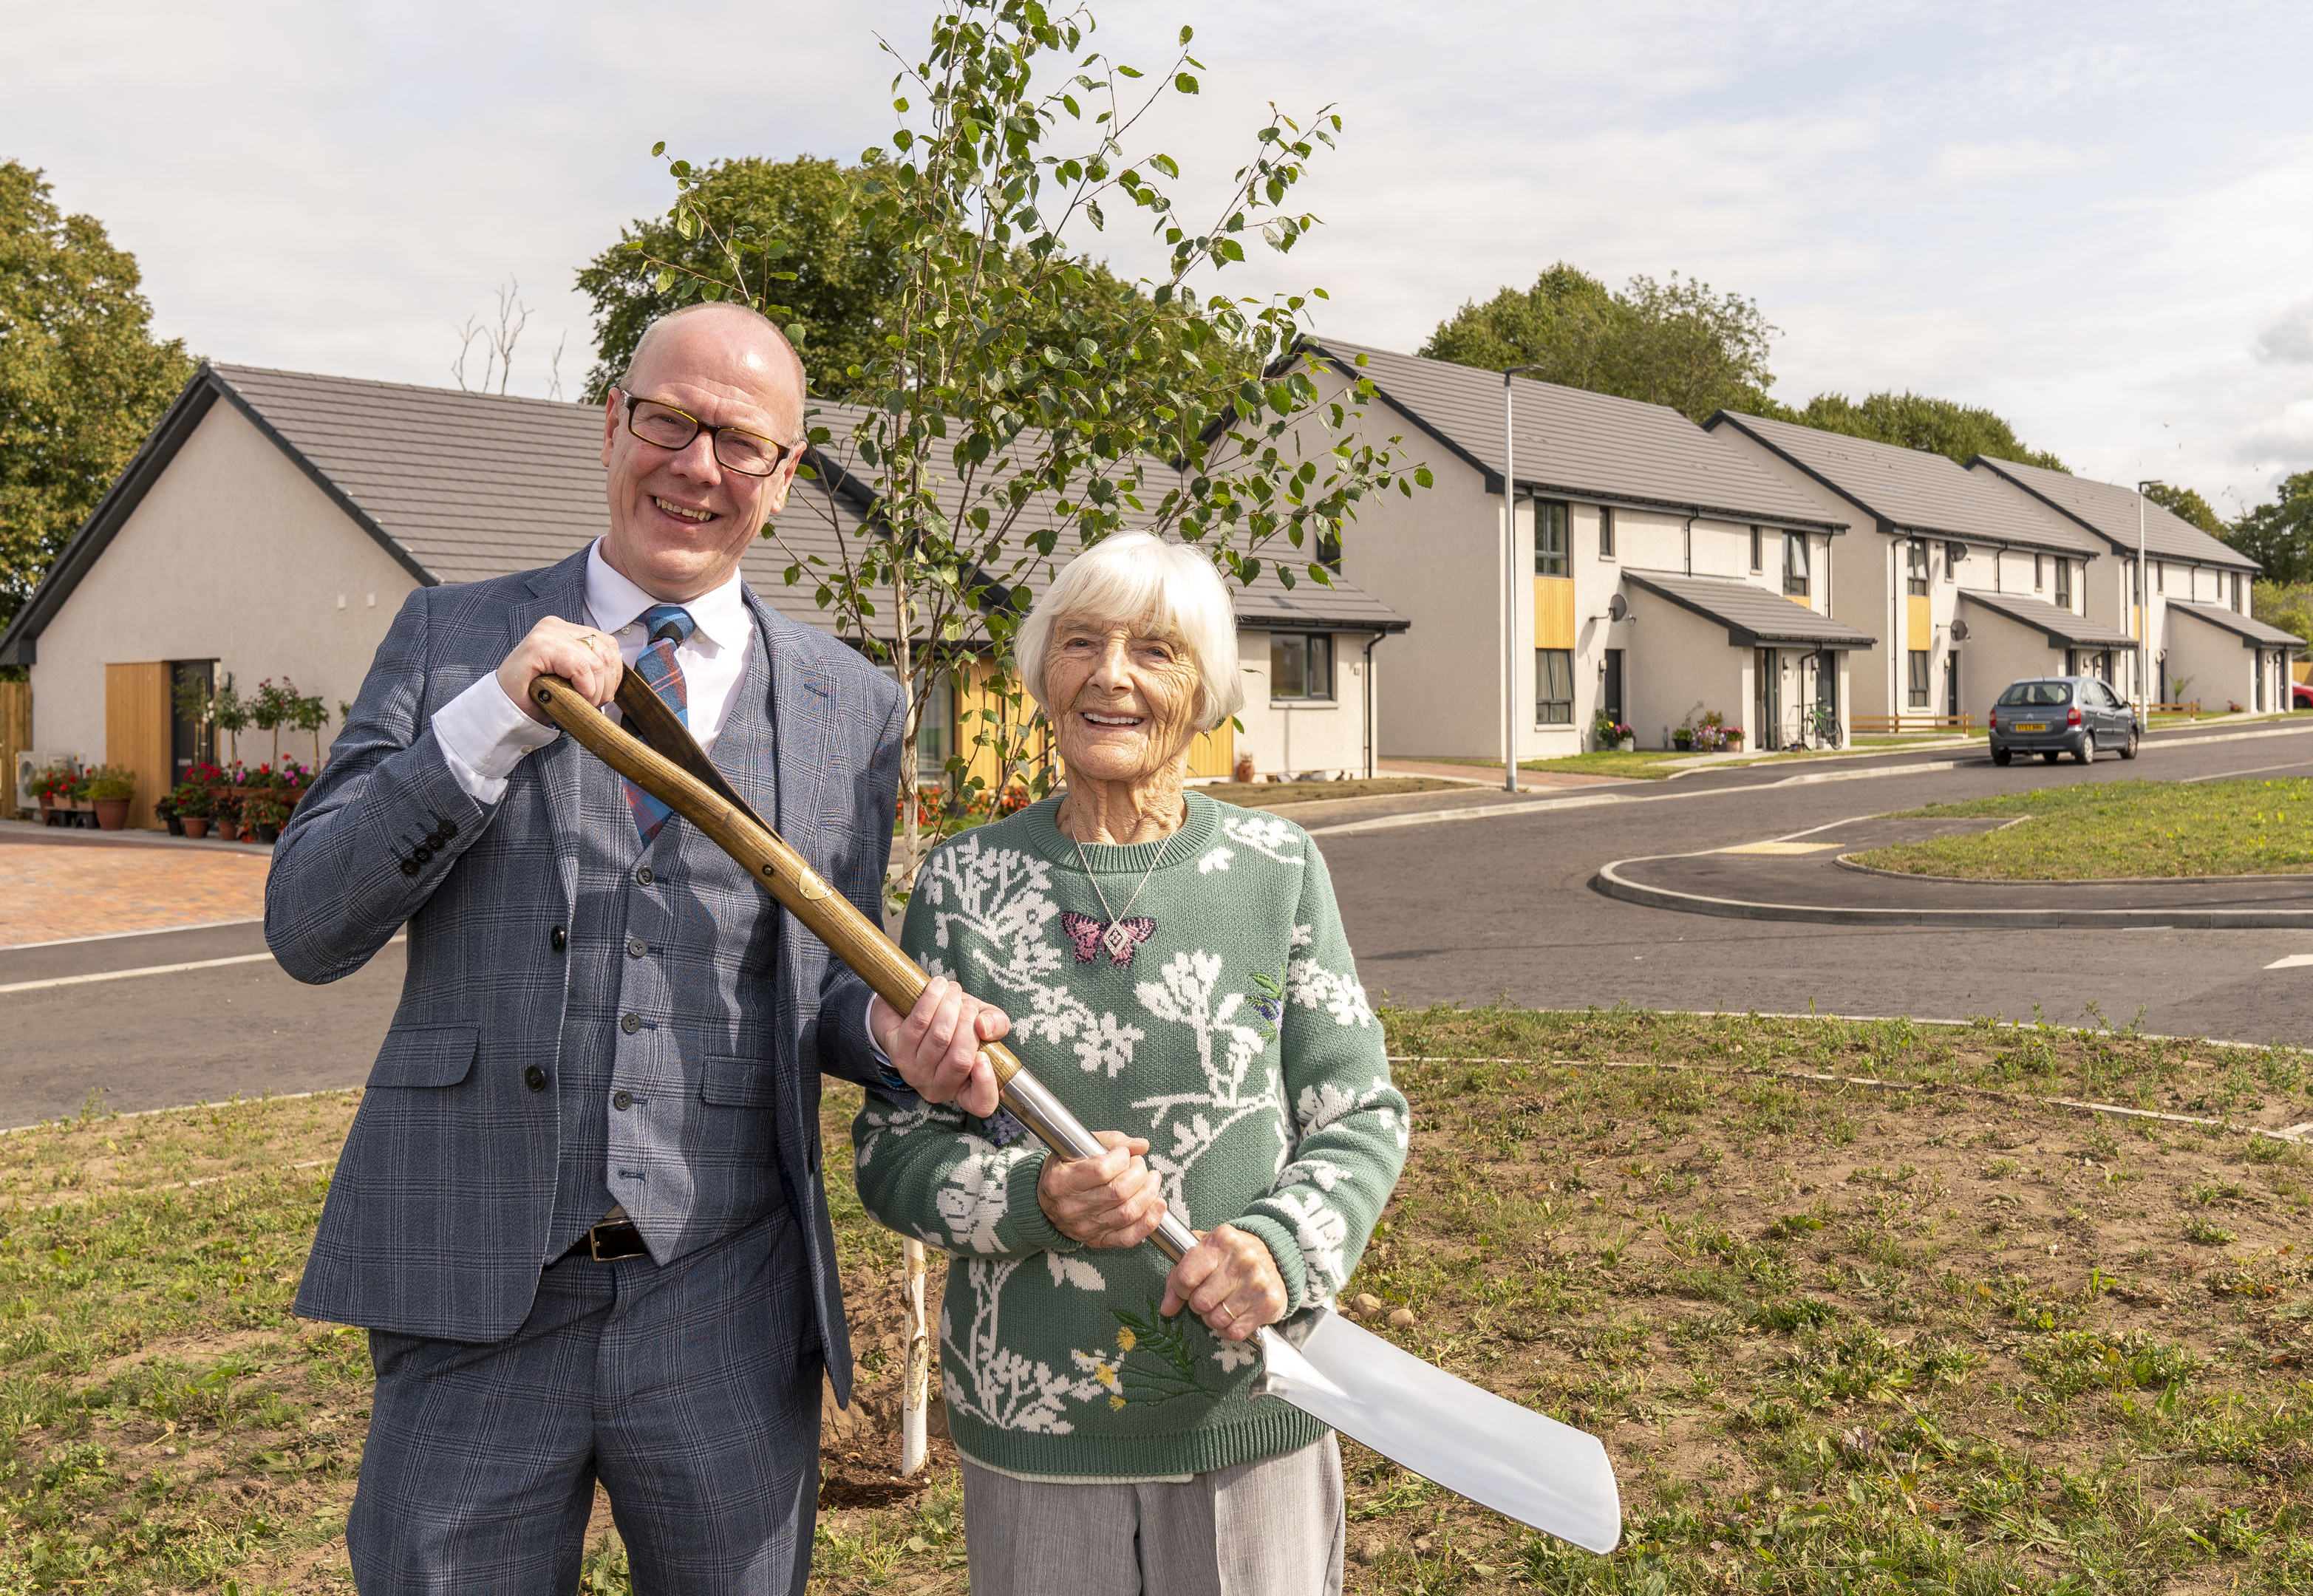 This is a n image from the visit of MSP Kevin Stewart, Housing Minister to Siwalik Road, Forres, Moray on Monday 20 August 2018. Photographed by Brian Smith T/A Jasperimage. © PICTURE CONTENT:- MSP Kevin Stewart, Housing Minister and Siwalik Road resident Lily Hendry